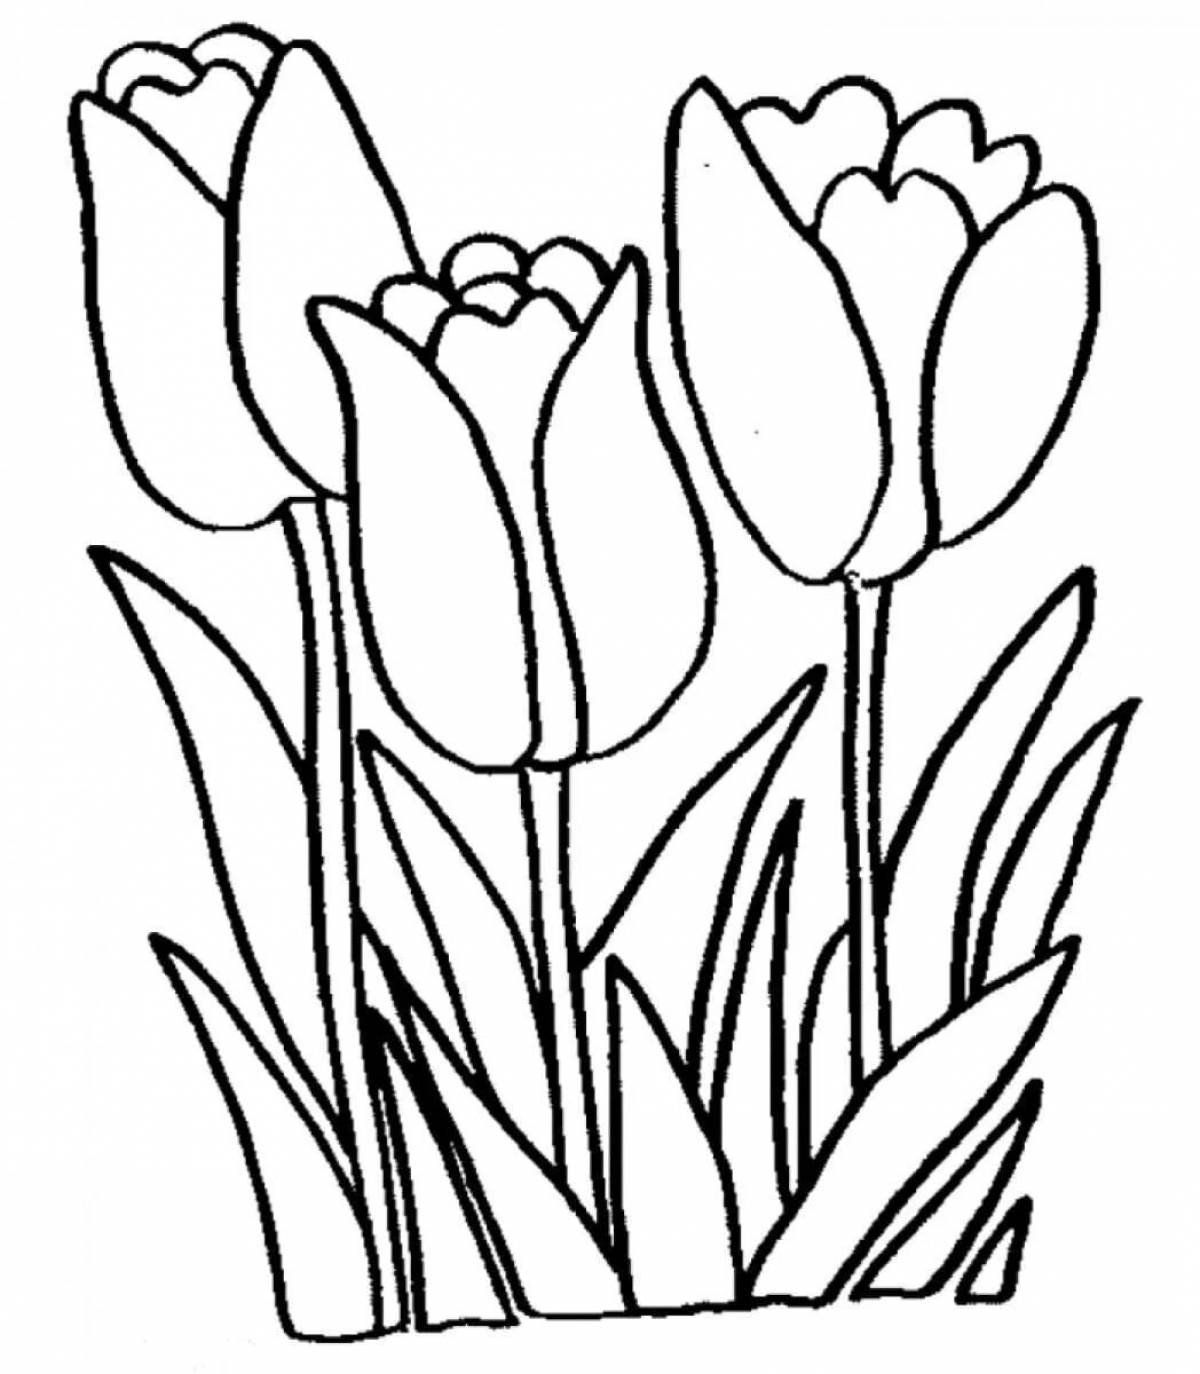 Coloring book dazzling tulips for children 5-6 years old